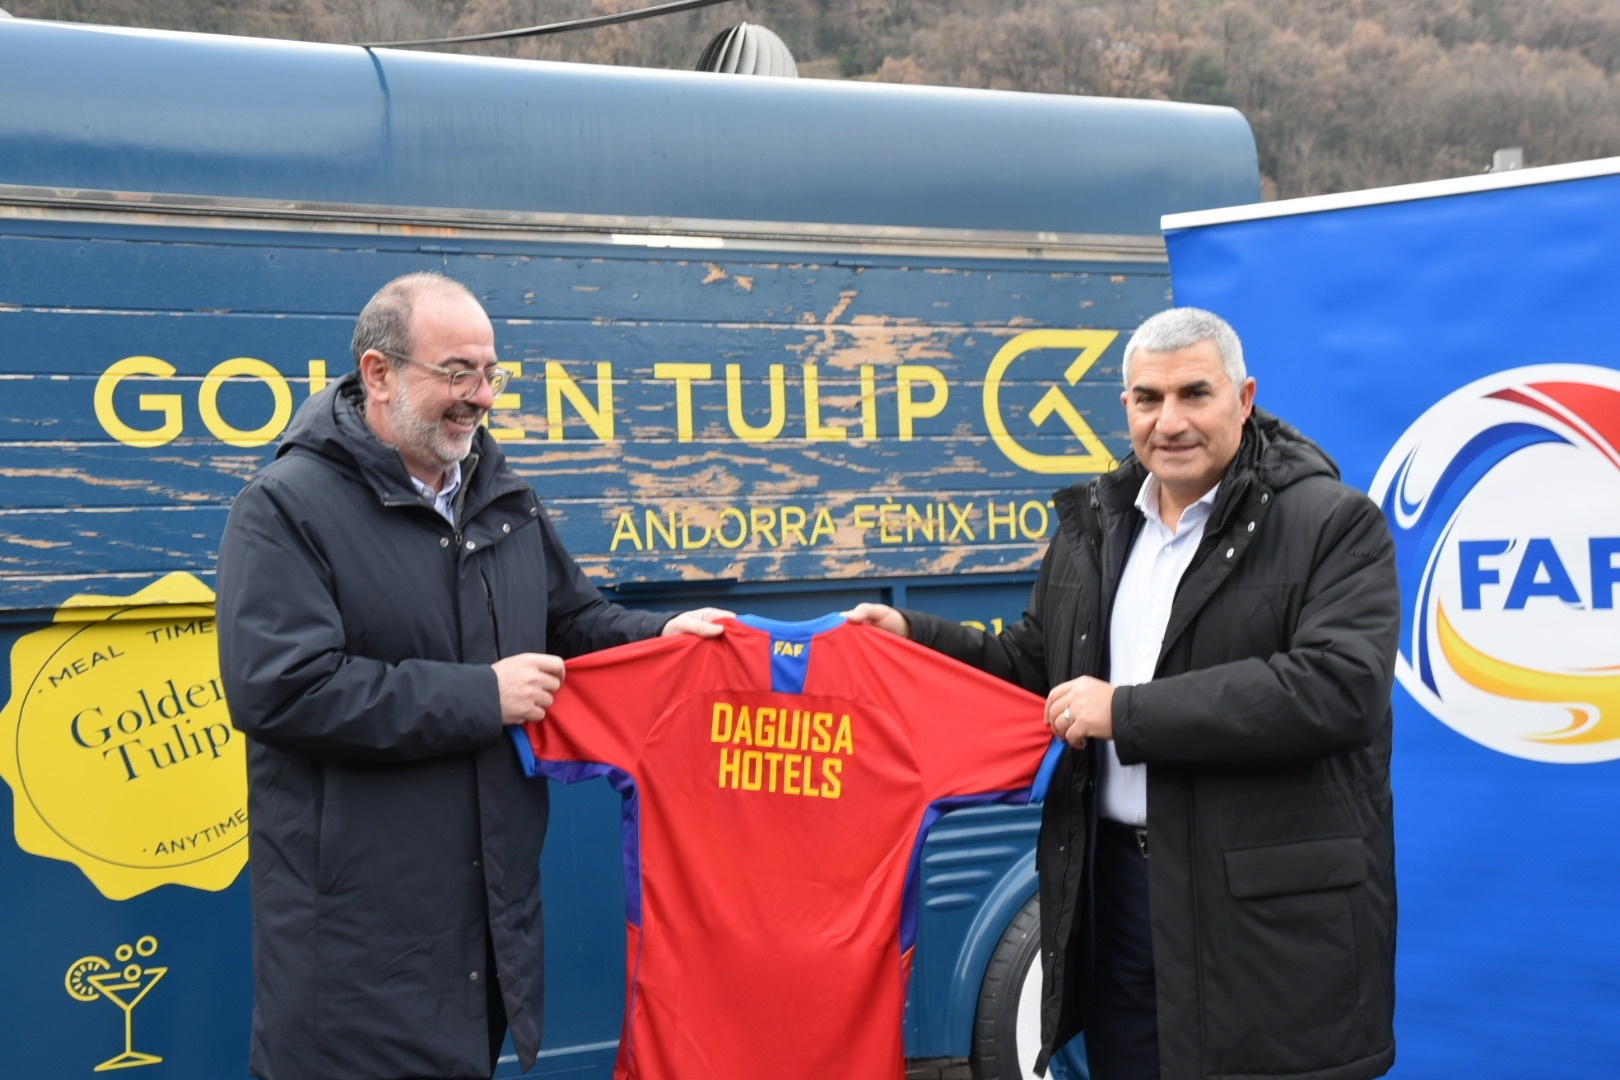 Daguisa Hotels becomes the new official sponsor of the Andorran of the Andorran Football Federation